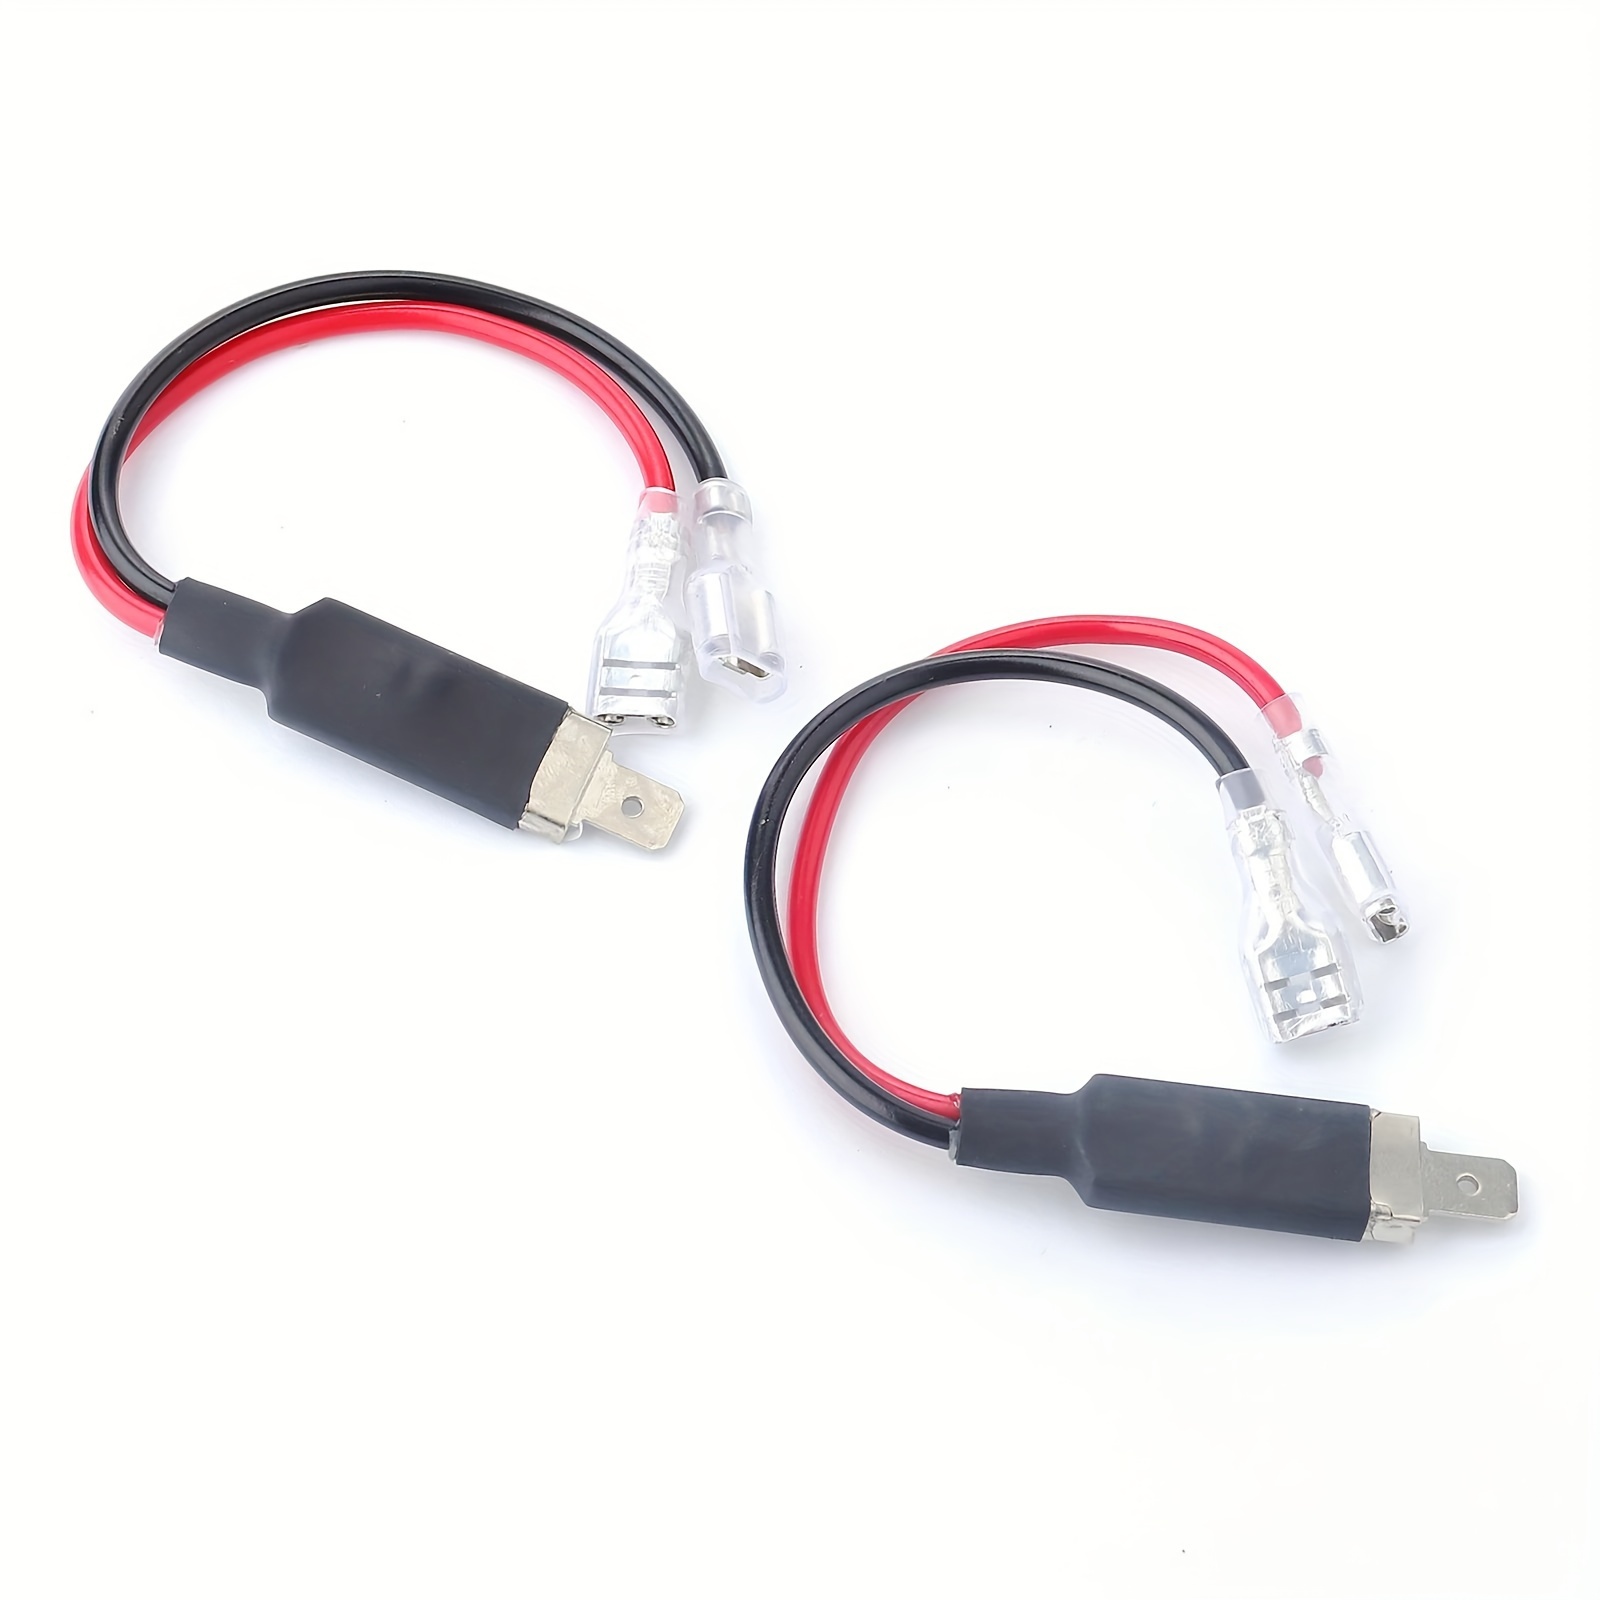  H1 LED Conversion Cable, 2pcs Conversion Wiring Connector Cable  Holder Adapter for LED Headlight Bulbs : Automotive